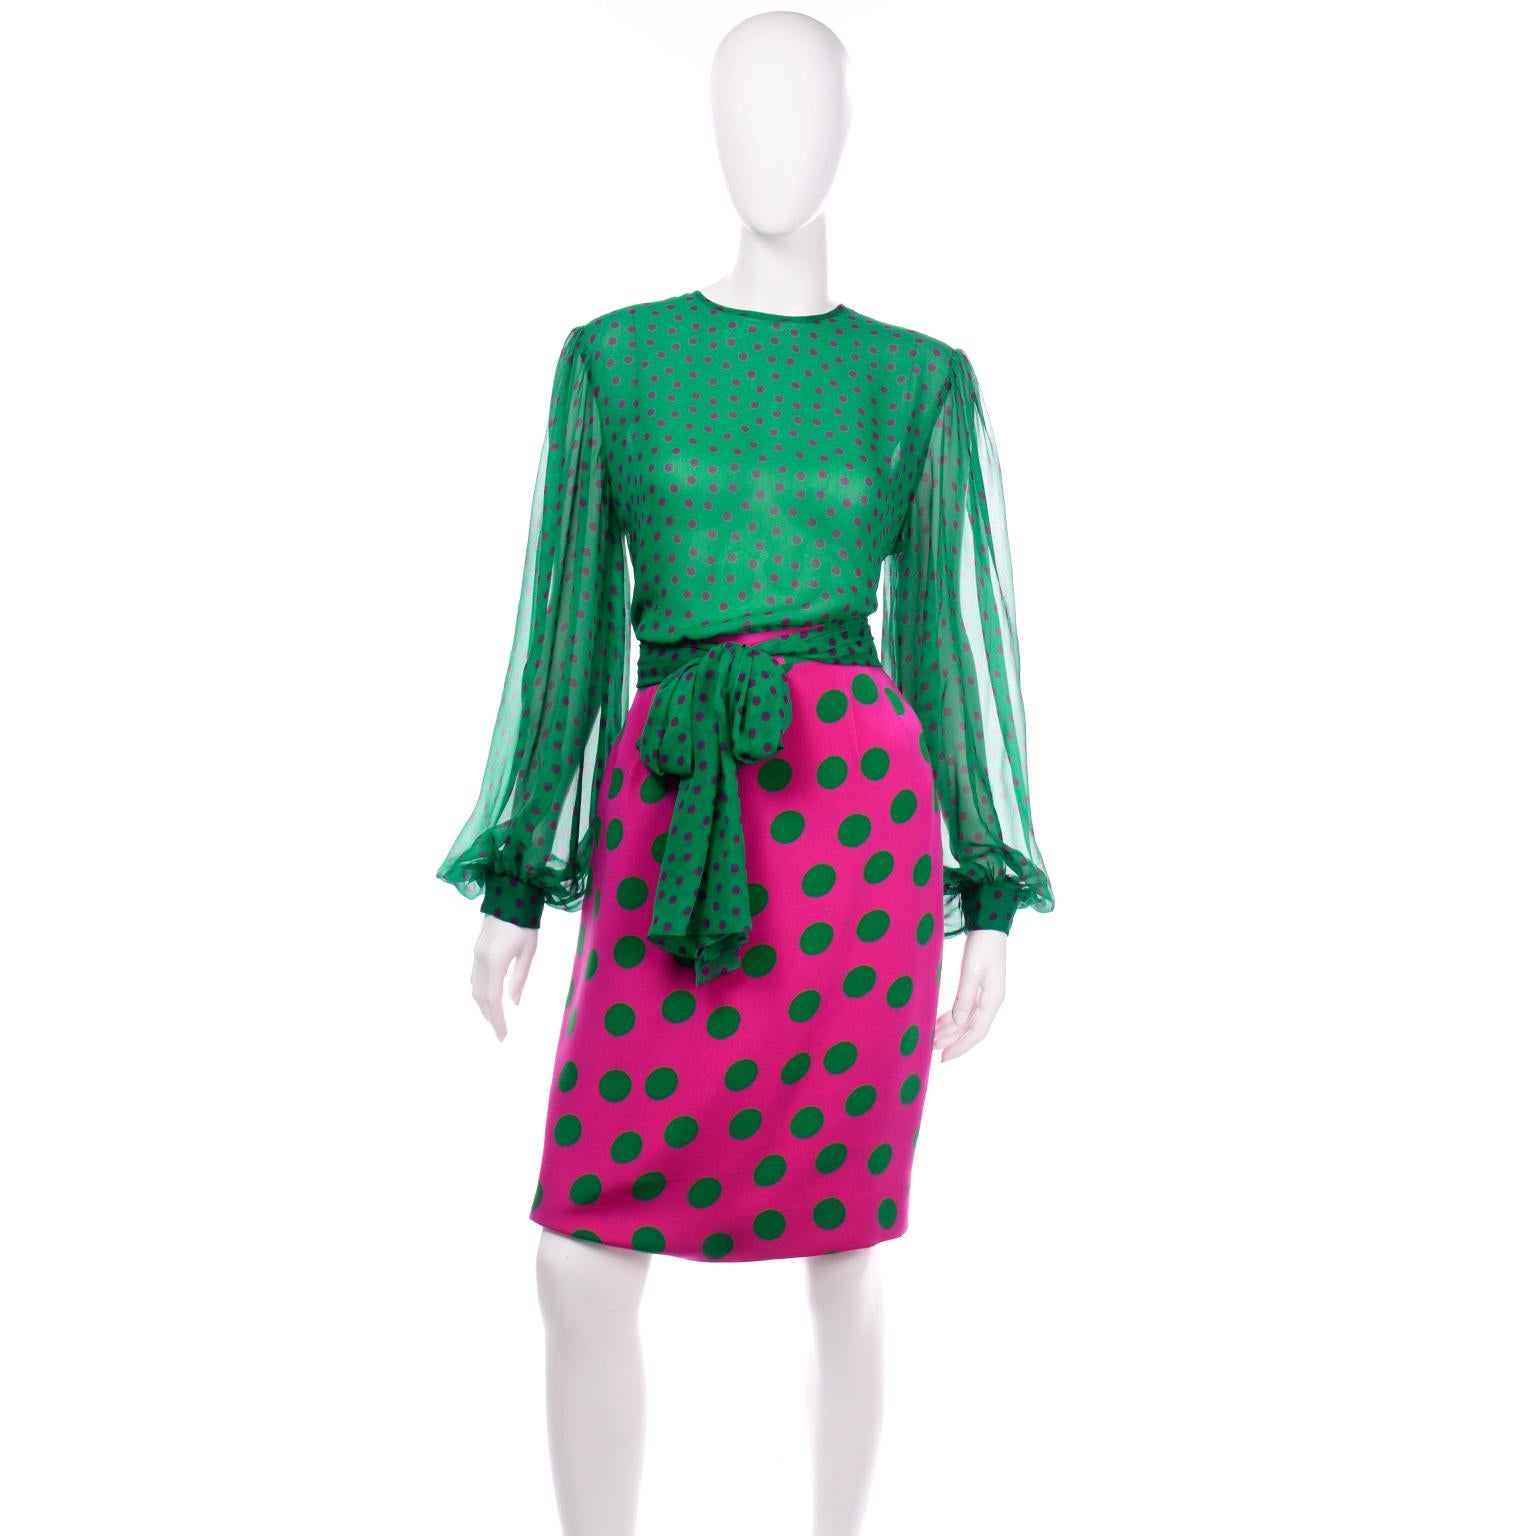 This vintage late 1980's David Hayes fuschia and green polka dot skirt suit originally sold at Saks Fifth Avenue for $1670. The base color of the fully lined jacket and skirt is fuschia pink and the polka dots are green. The beautiful silk blouse